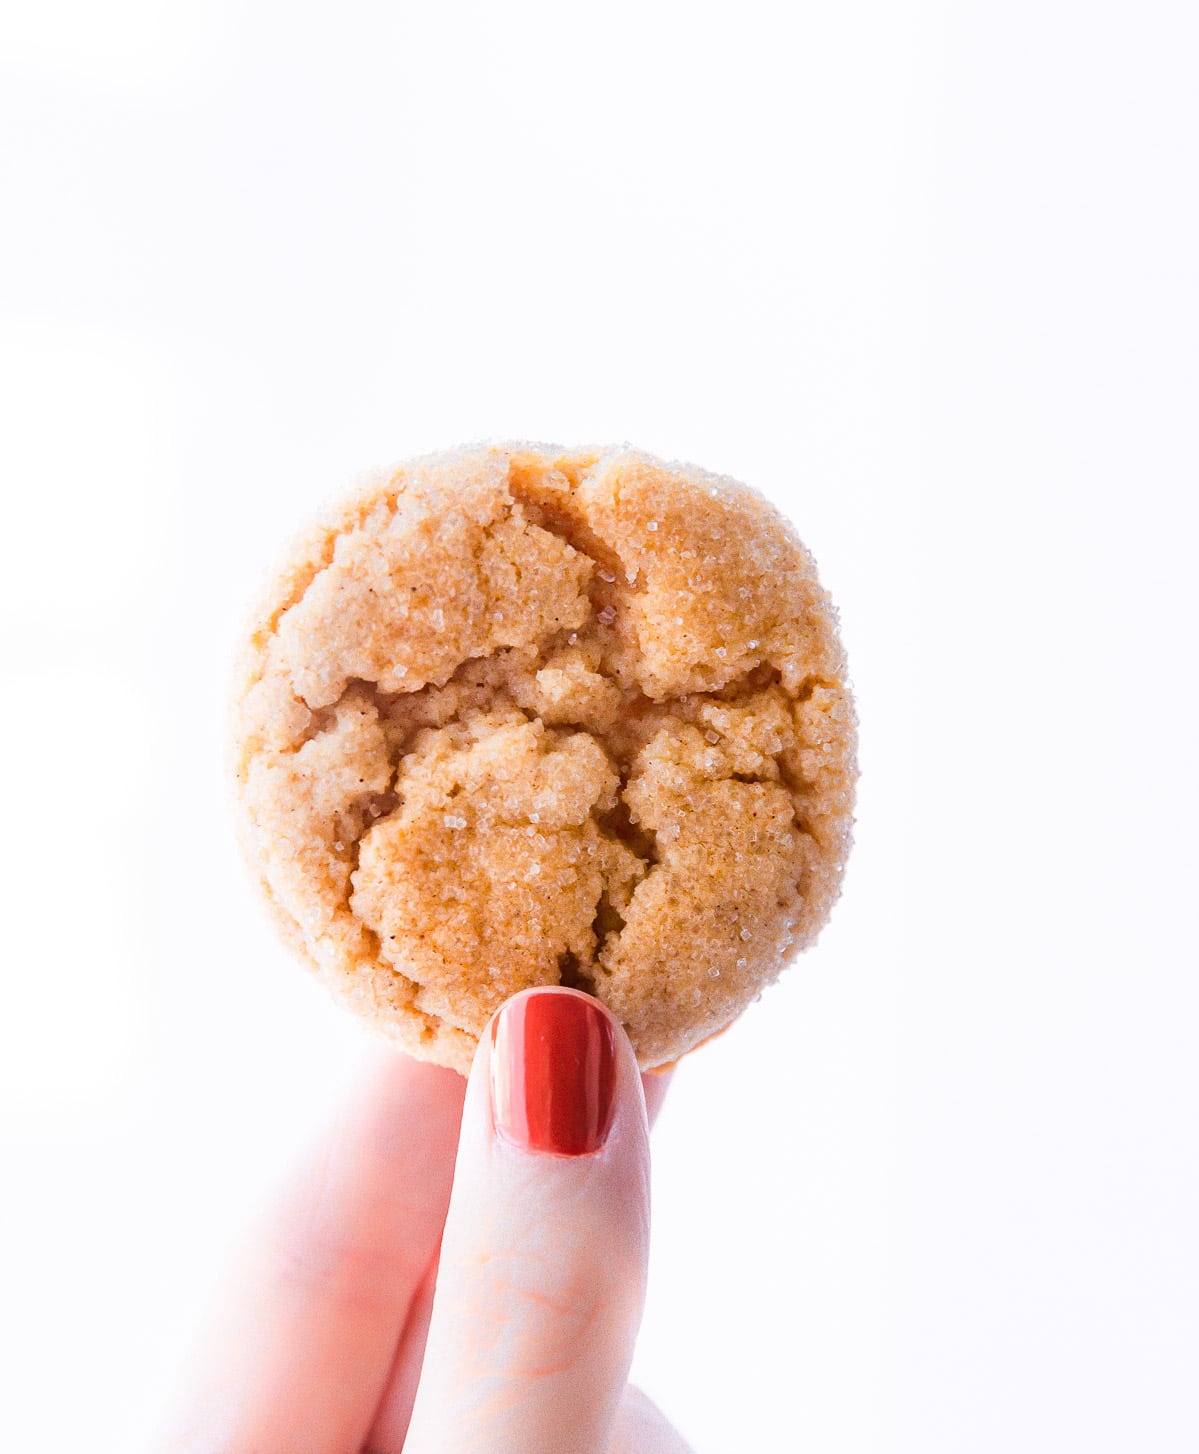 An almond flour sugar cookie sprinkled with cinnamon sugar being held between thumb and forefinger.